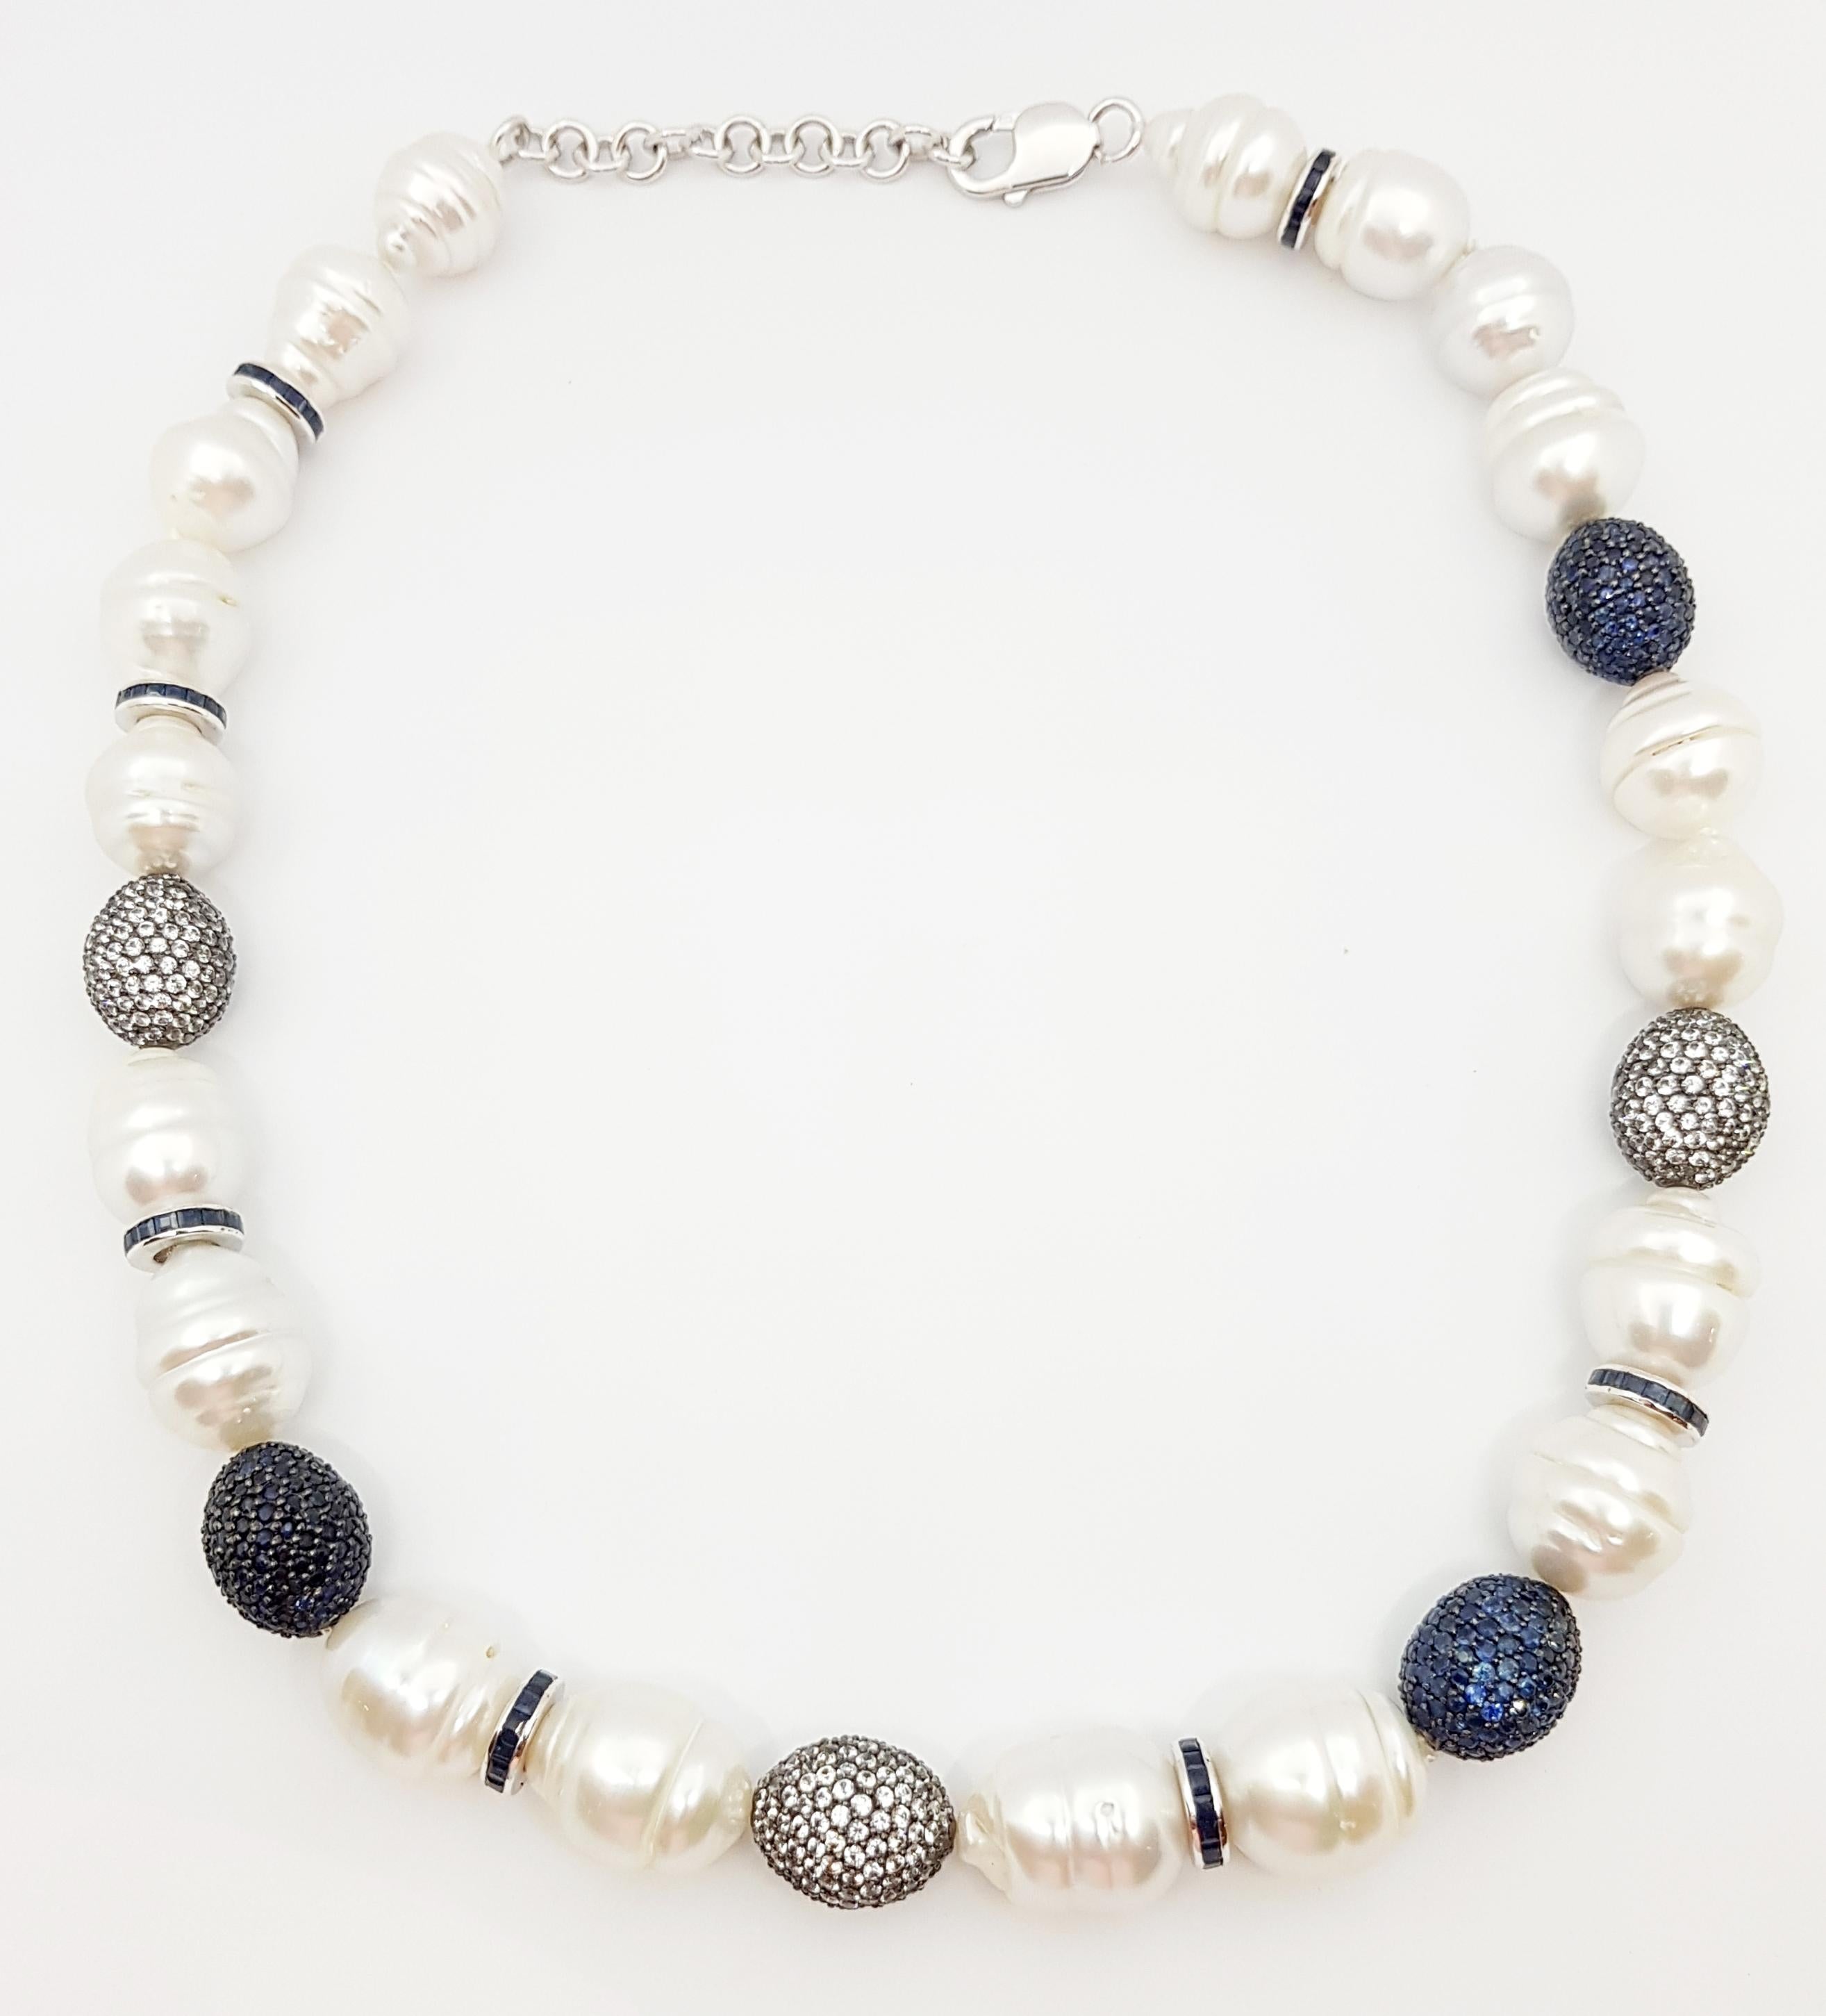 South Sea Pearl, Blue Sapphire, White Sapphire Necklace set in Silver Settings

Width:  1.4 cm 
Length:  51.0 cm
Total Weight: 116.33 grams

*Please note that the silver setting is plated with rhodium to promote shine and help prevent oxidation. 